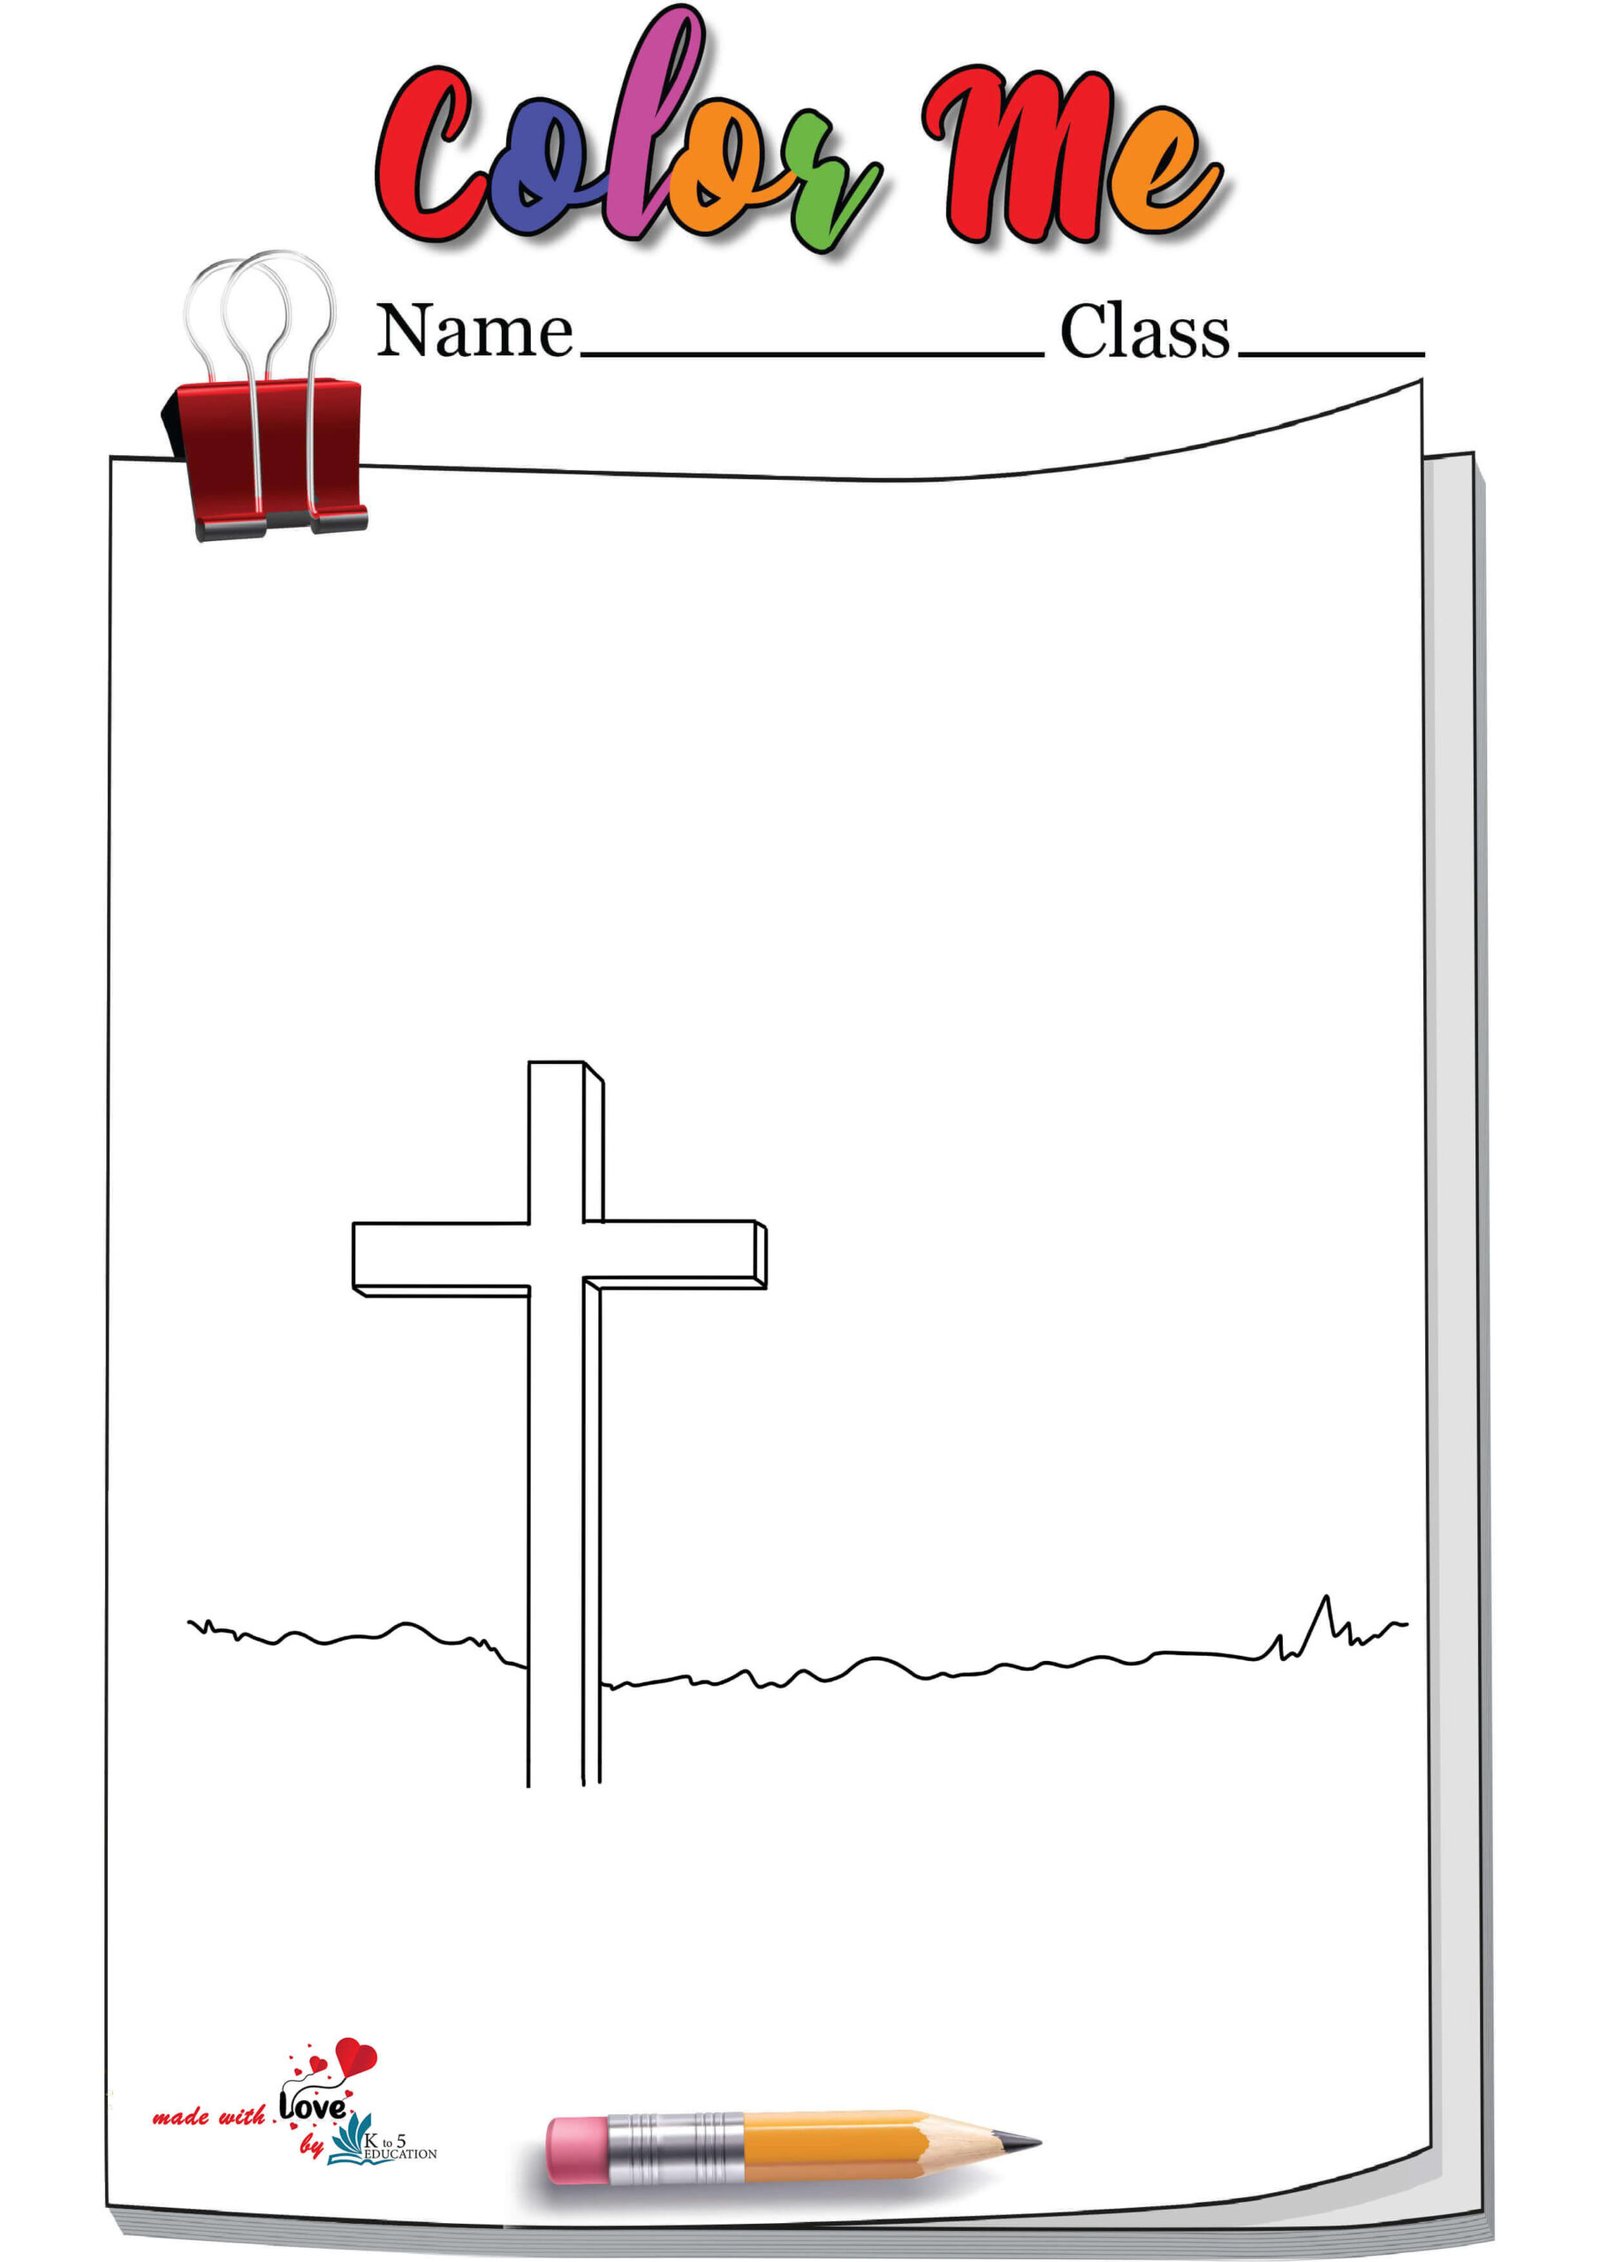 Christian Cressfaith Coloring Page